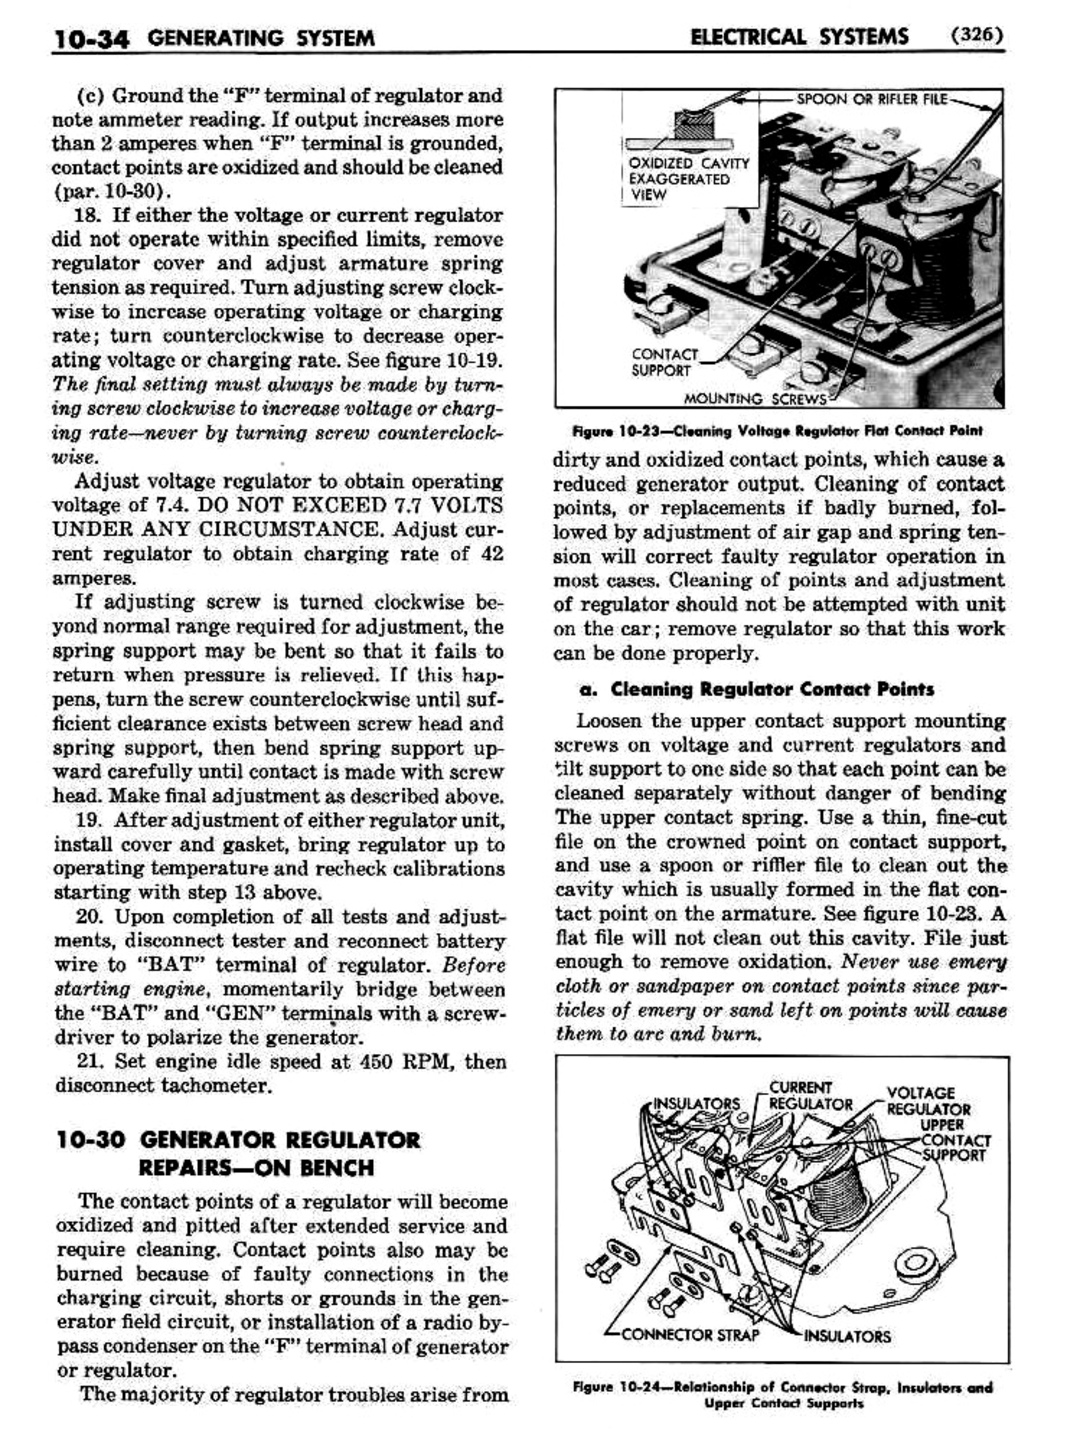 n_11 1951 Buick Shop Manual - Electrical Systems-034-034.jpg